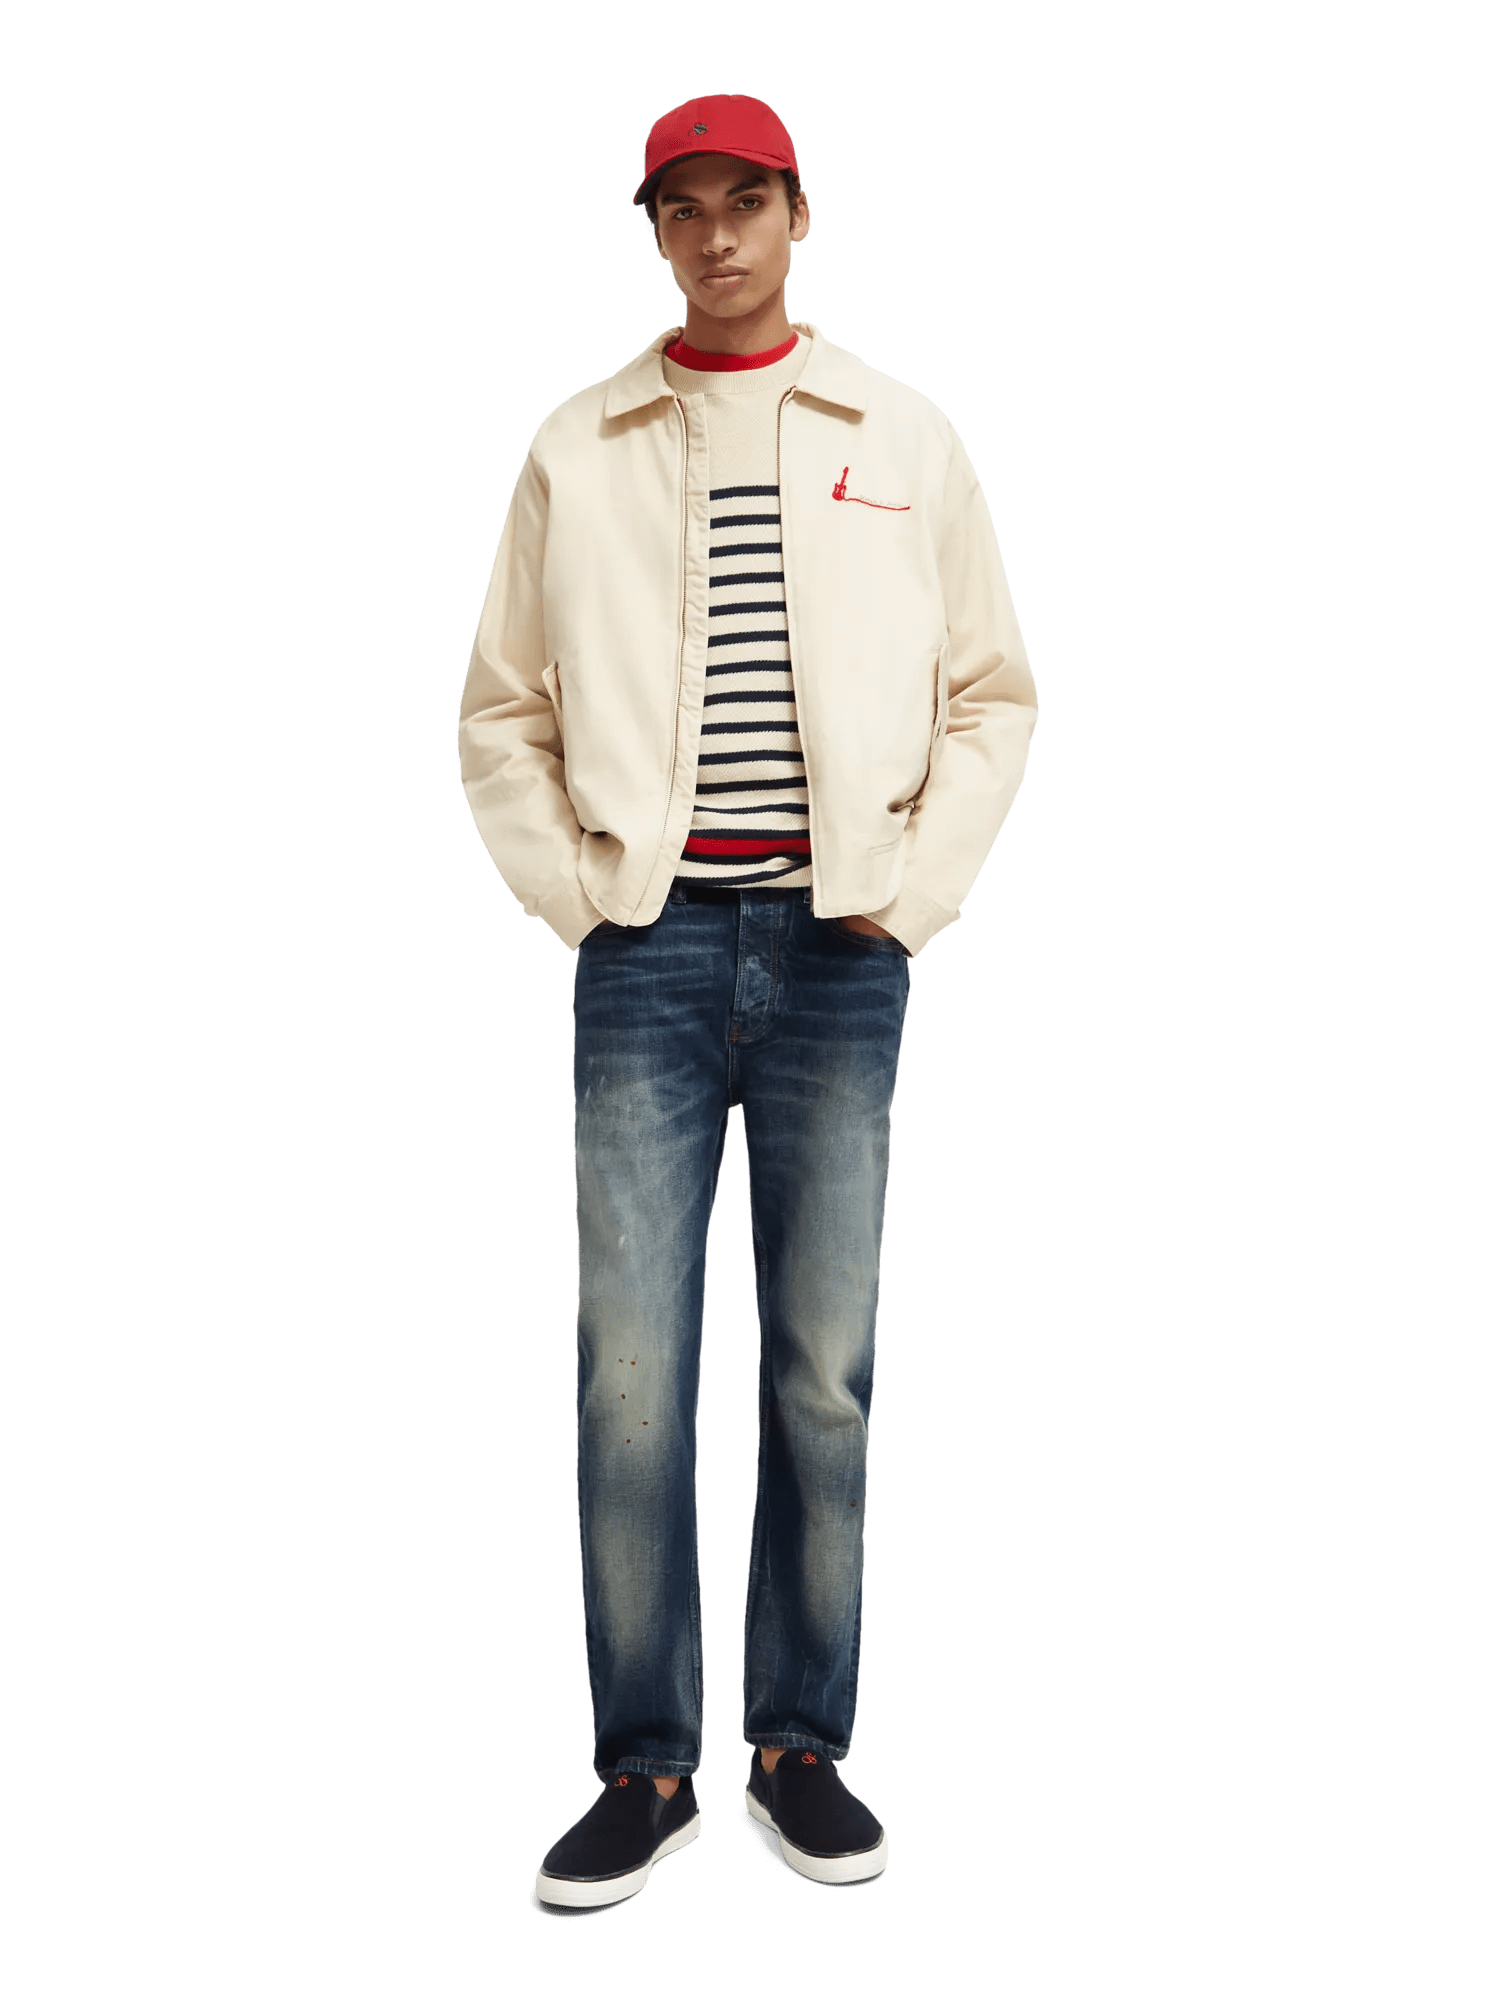 Scotch & Soda - The Drop Selvedge Tapered Jean - Vintage Sound